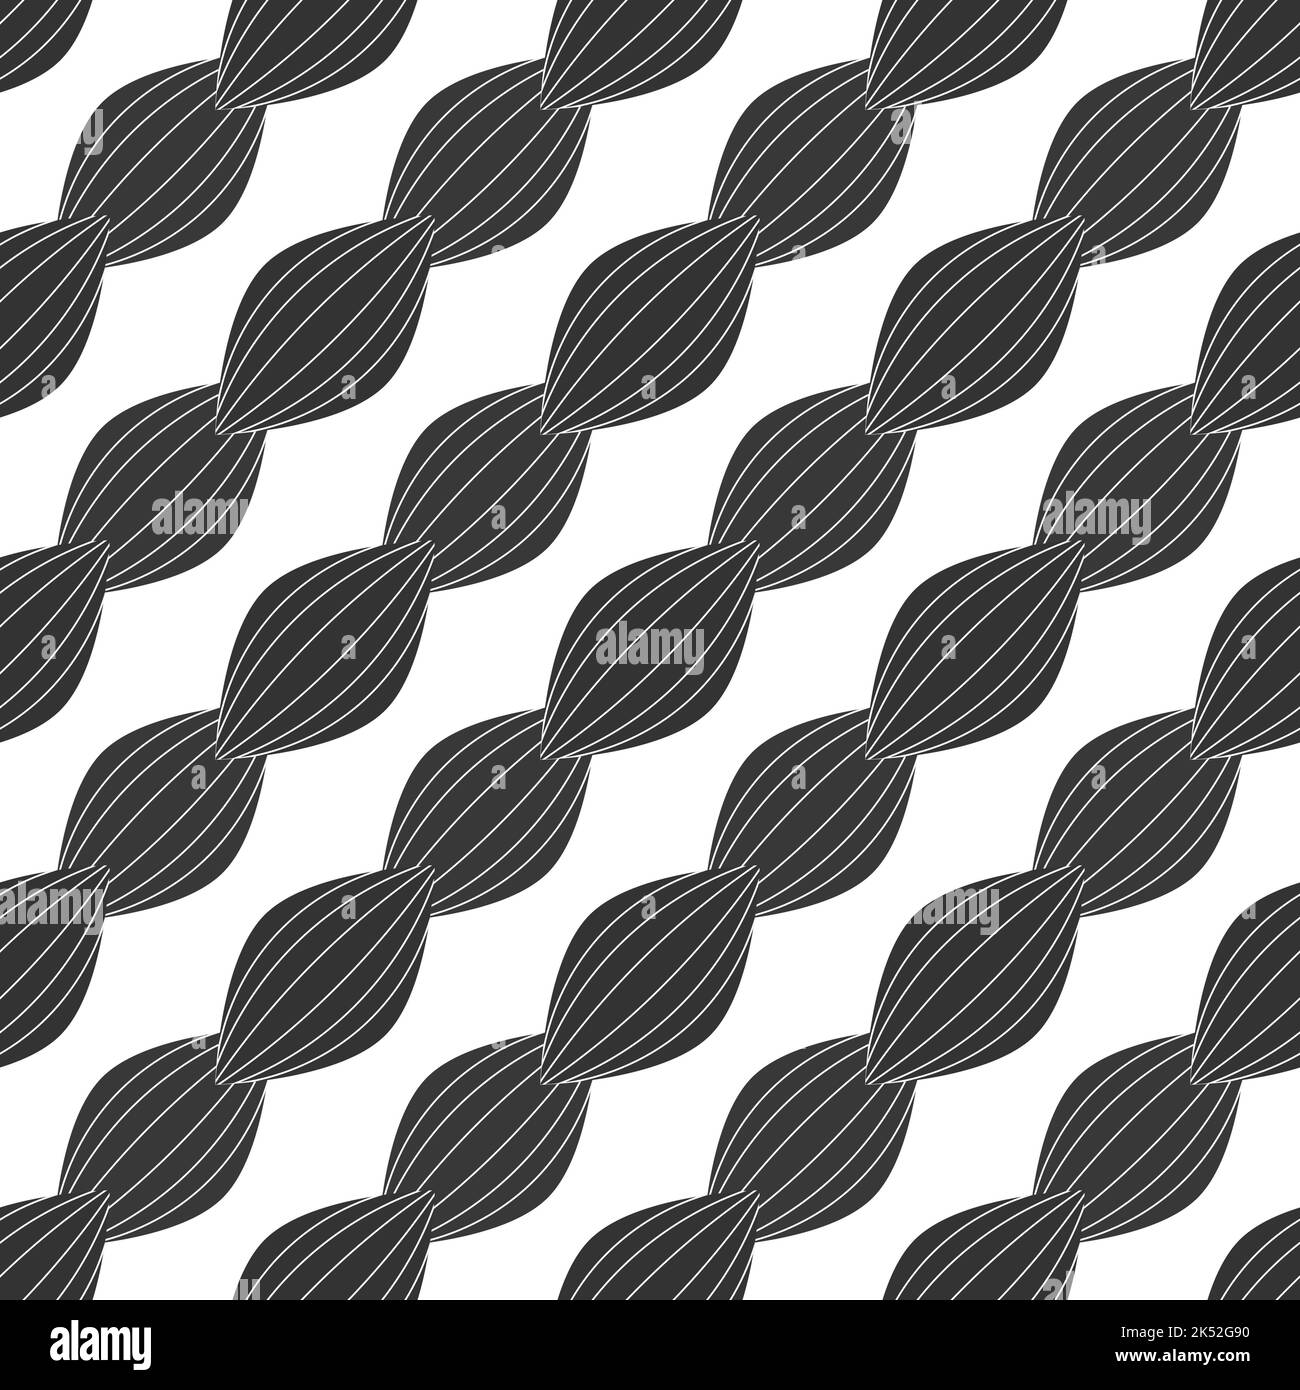 Black and white braid seamless pattern. Vector illustration. Stock Vector